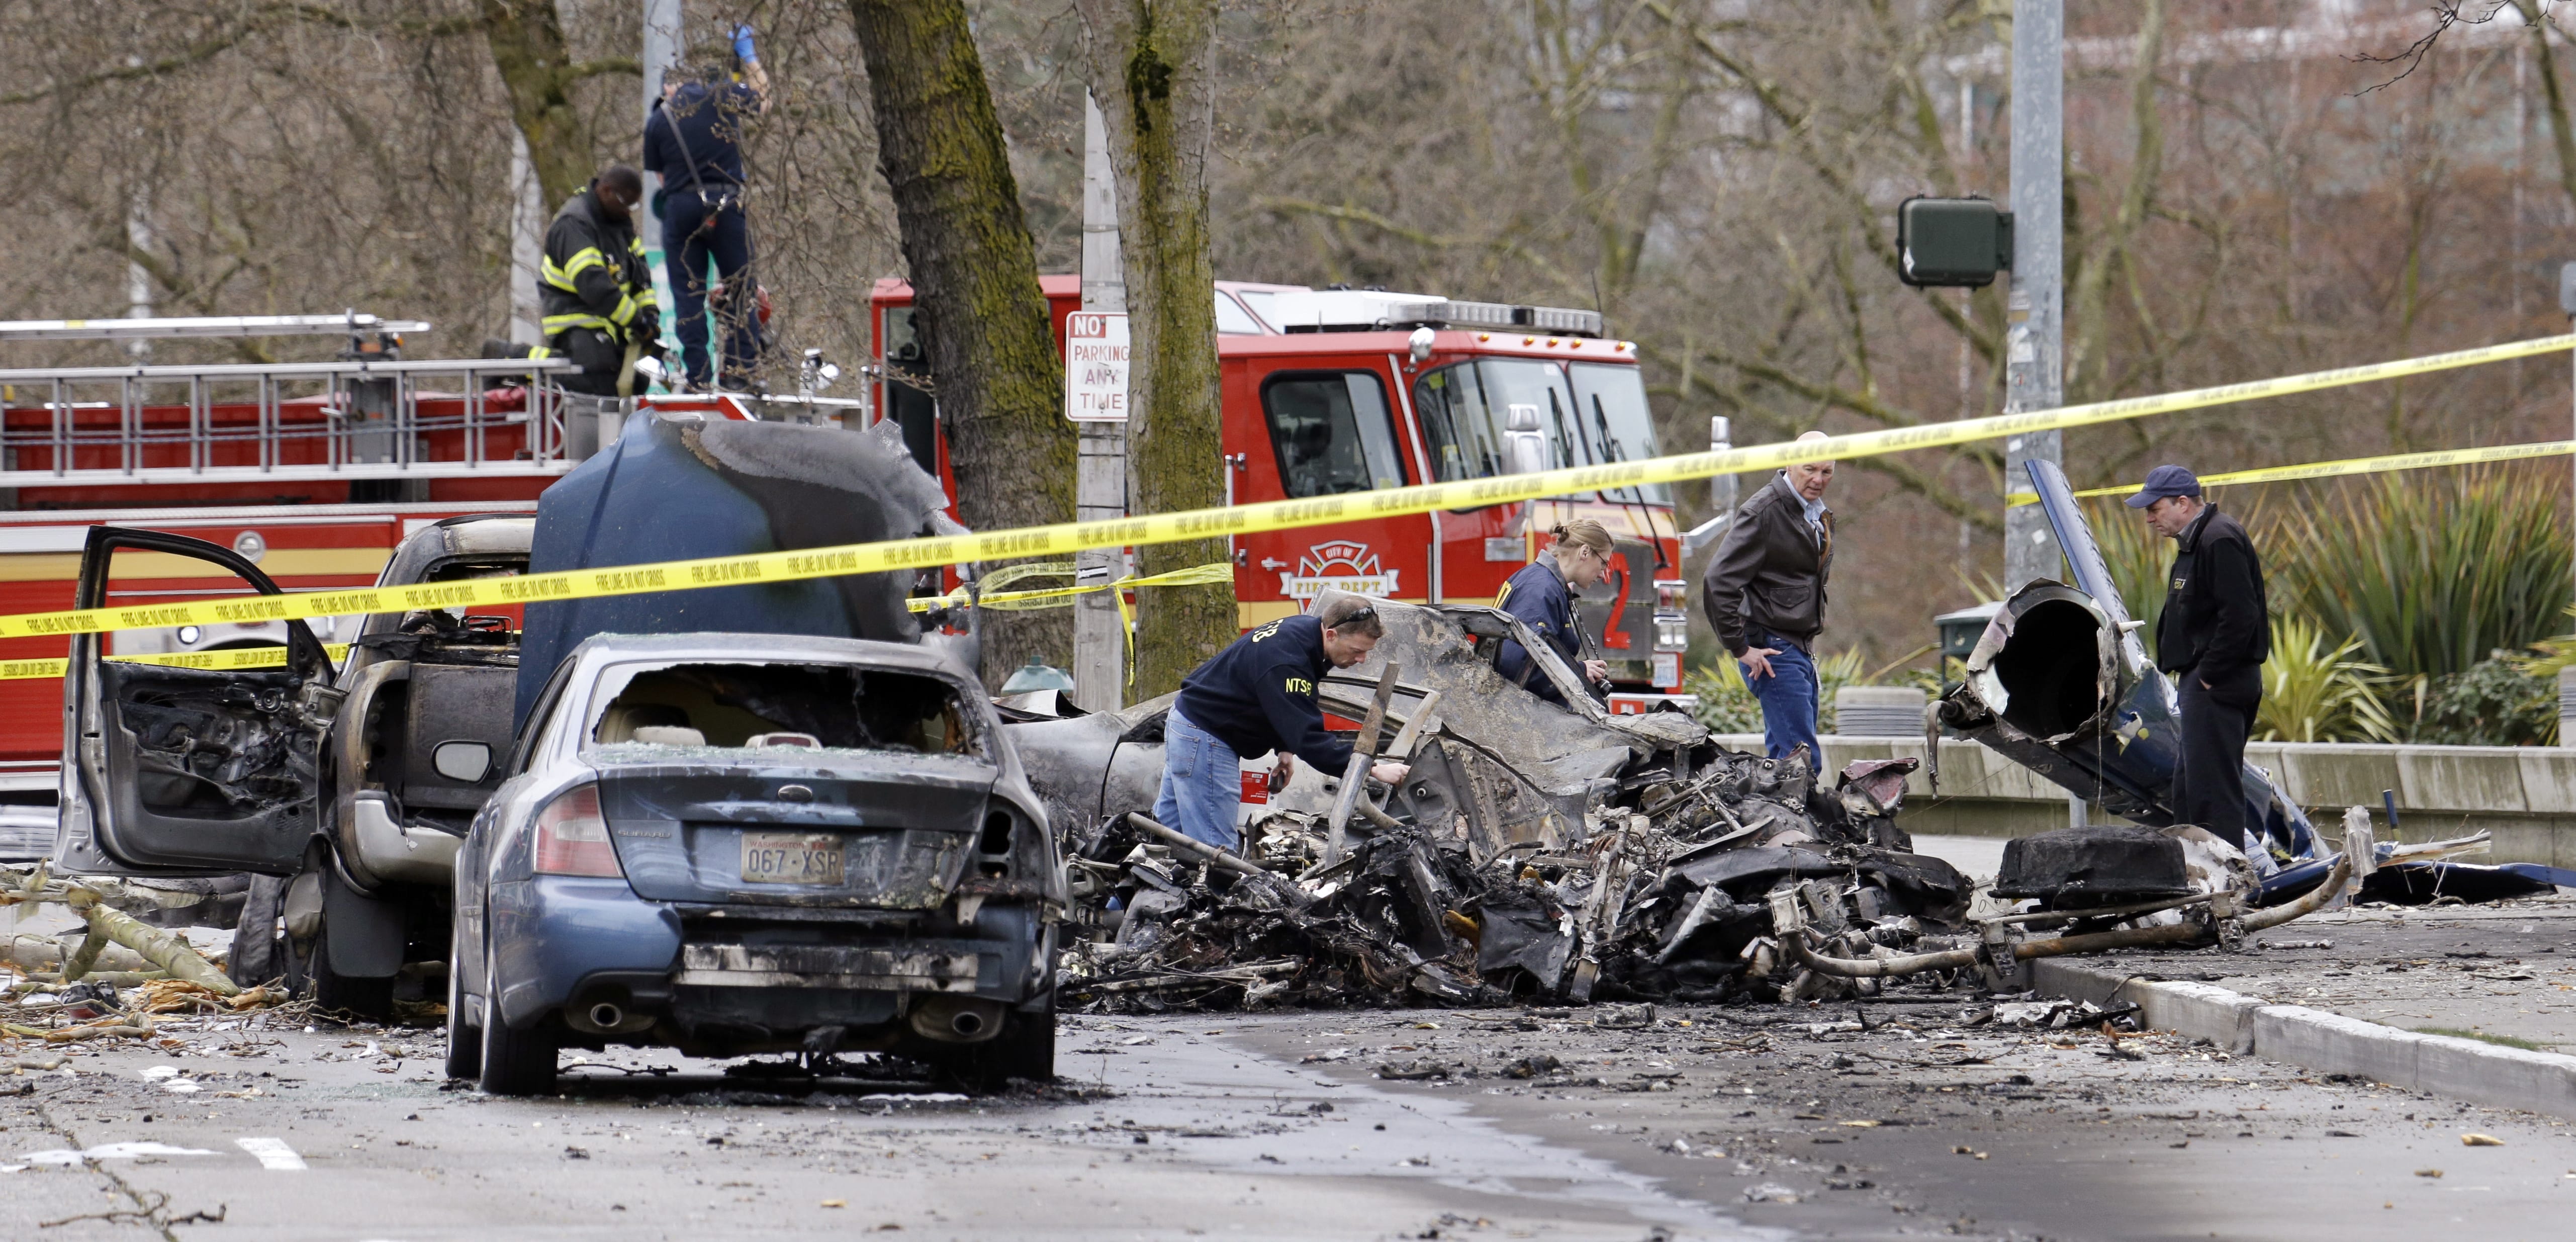 Investigators look through the charred wreckage of a news helicopter and two vehicles after the chopper crashed into a city street near the Space Needle on March 18, 2014, in Seattle. Two people were killed and another was critically injured, according to the Seattle Fire Department.